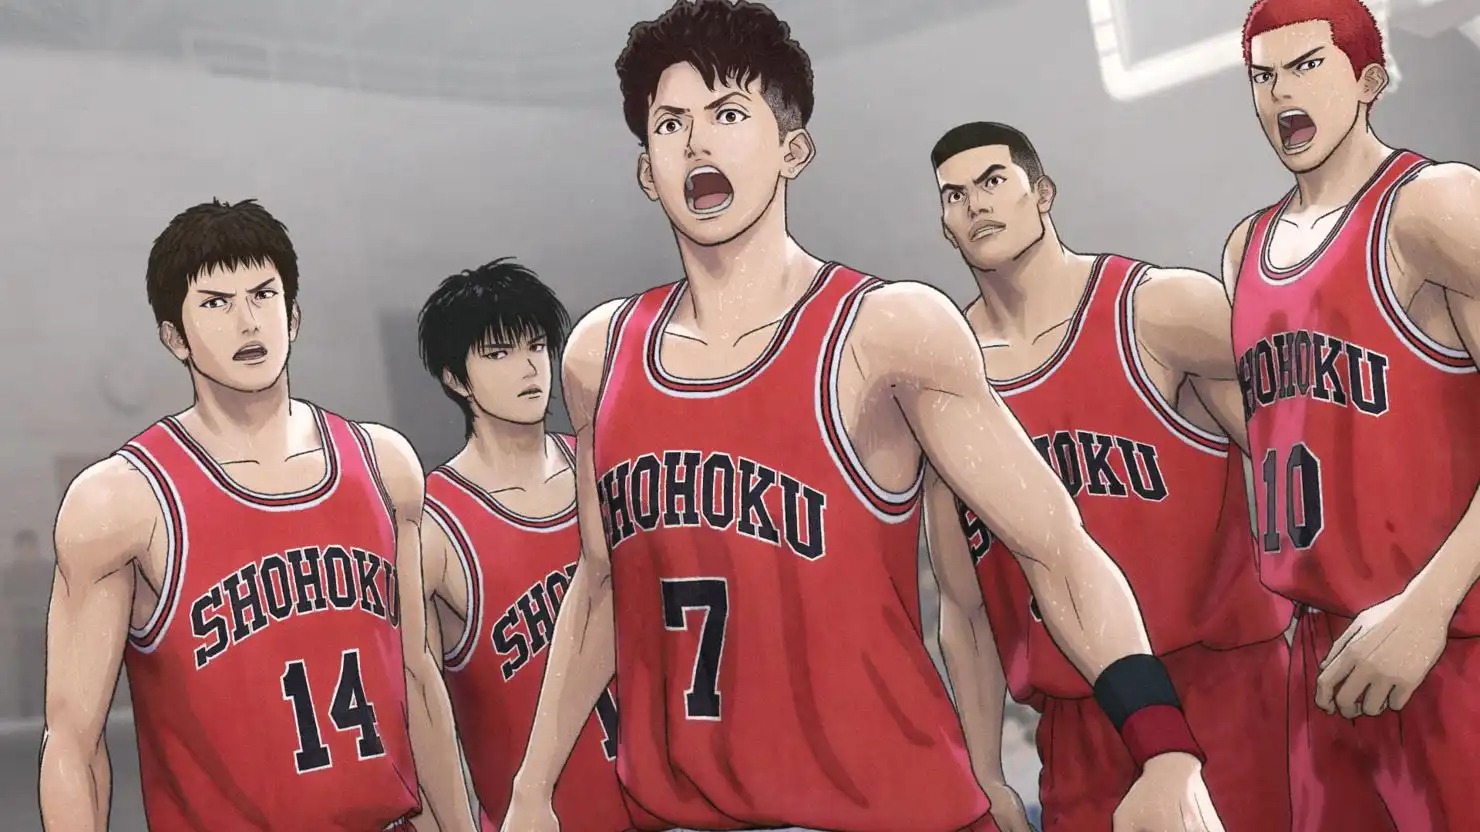 Crunchyroll FIRST SLAM DUNK Anime Film Jumps Above The Wind Rises To Become The 27th Highest Grossing Film In Japan